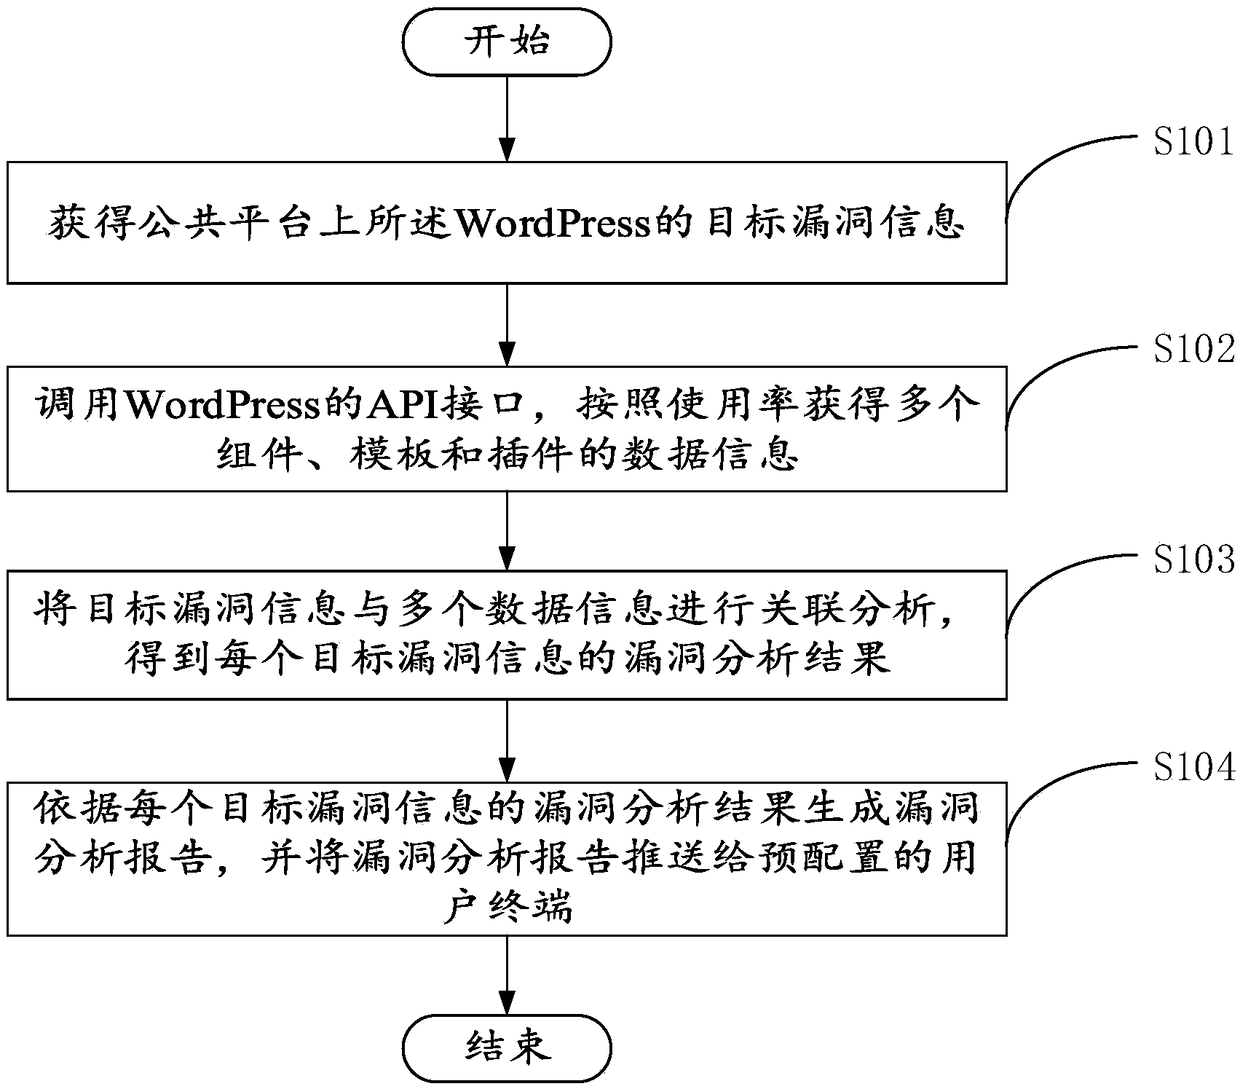 Method and device for vulnerability analysis based on WordPress